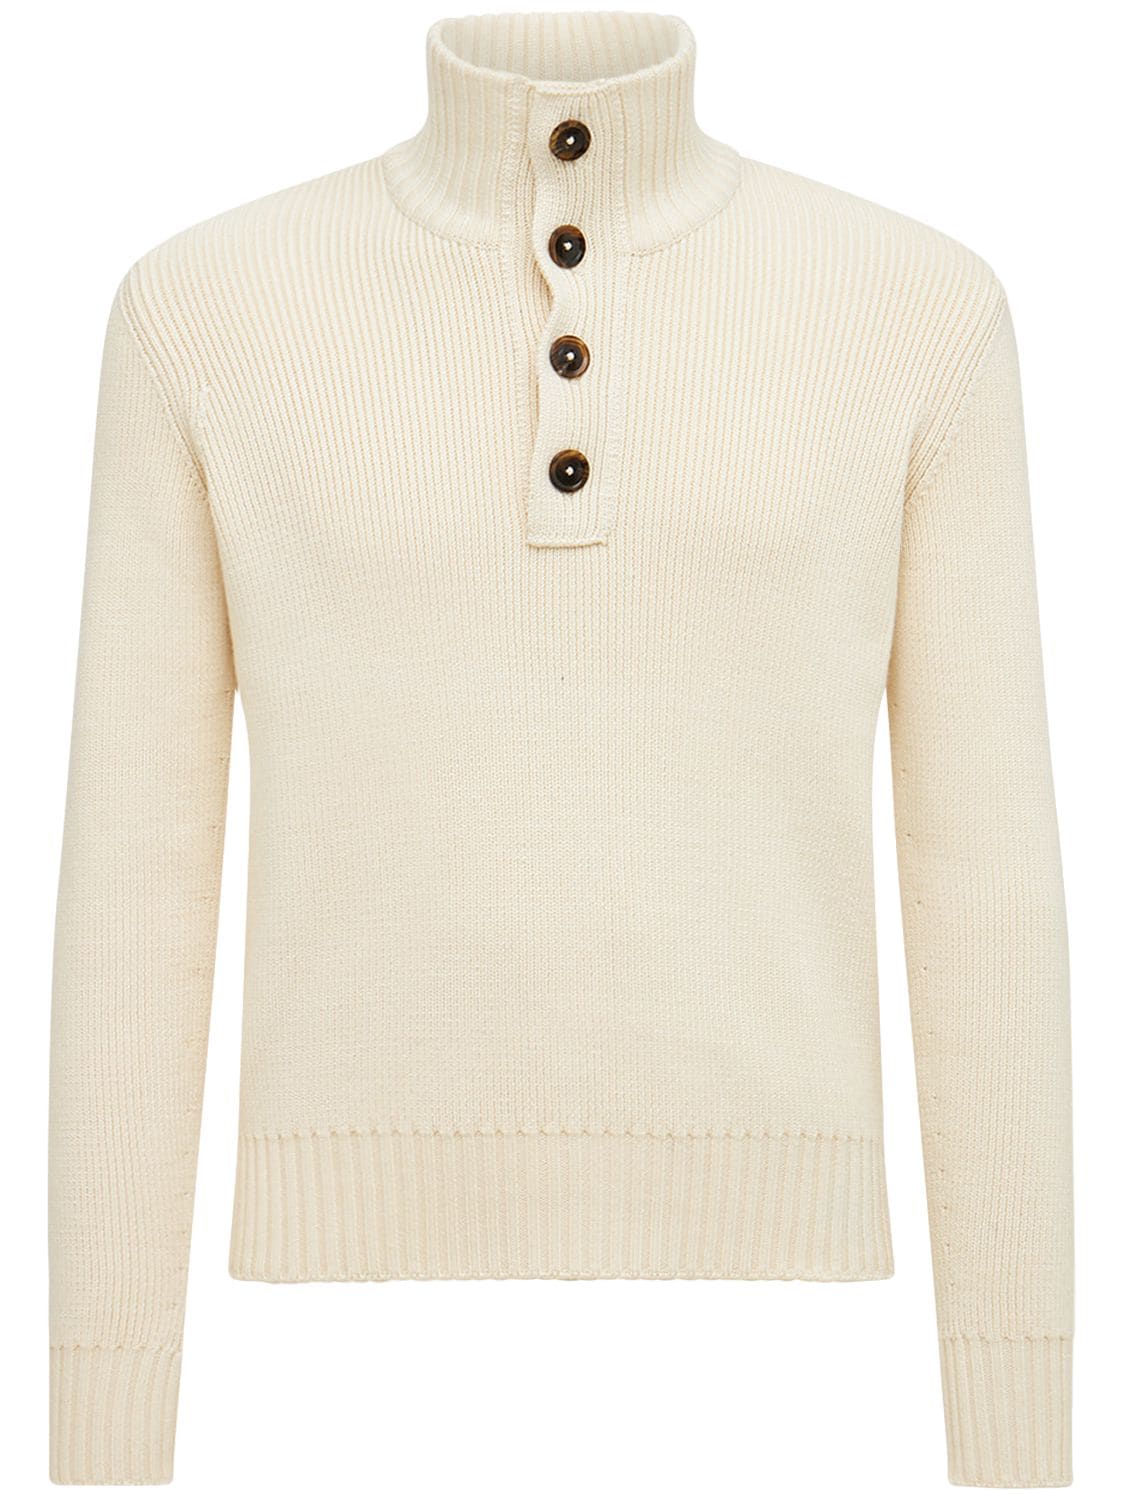 TOM FORD Wool & Silk Roll Neck Sweater for Men